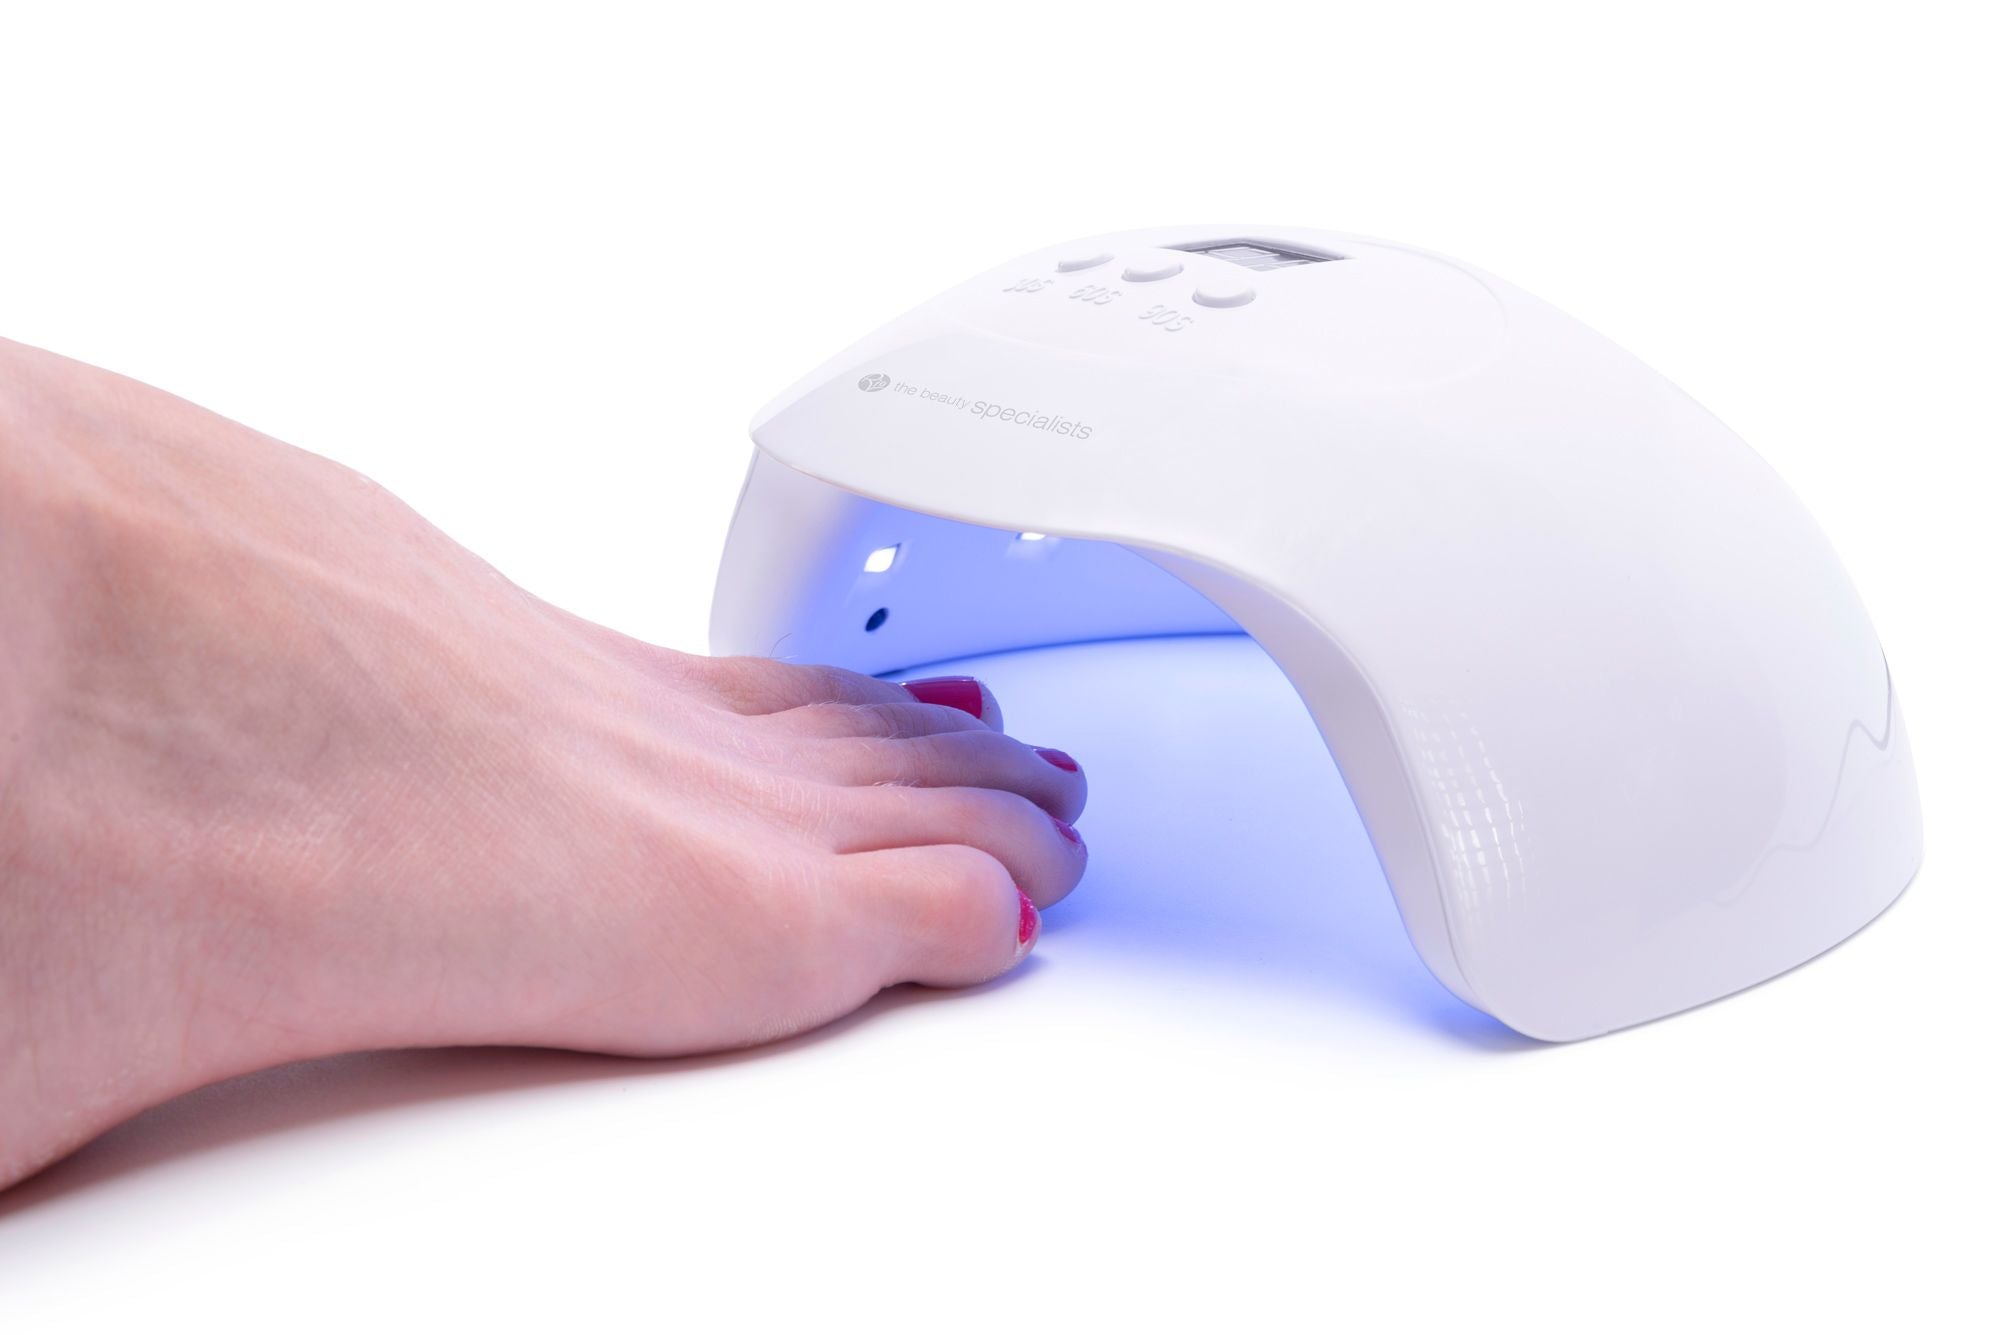 Foot under UV Nail lamp 36w with dual LED with UV light curing gel manicure